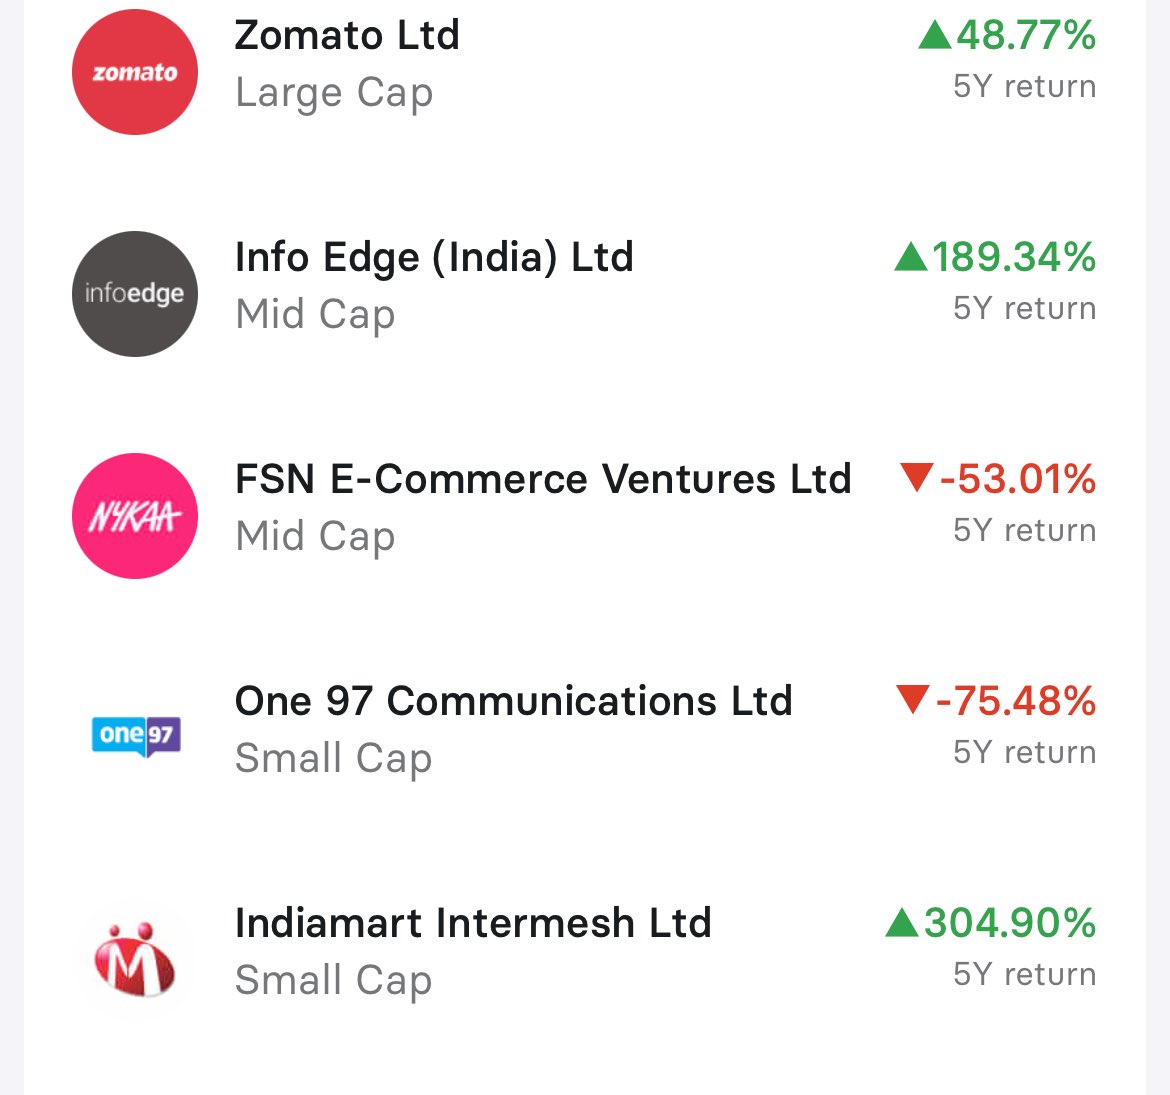 Highest performing new age businesses, which one is your favourite?

Invested in Indiamart